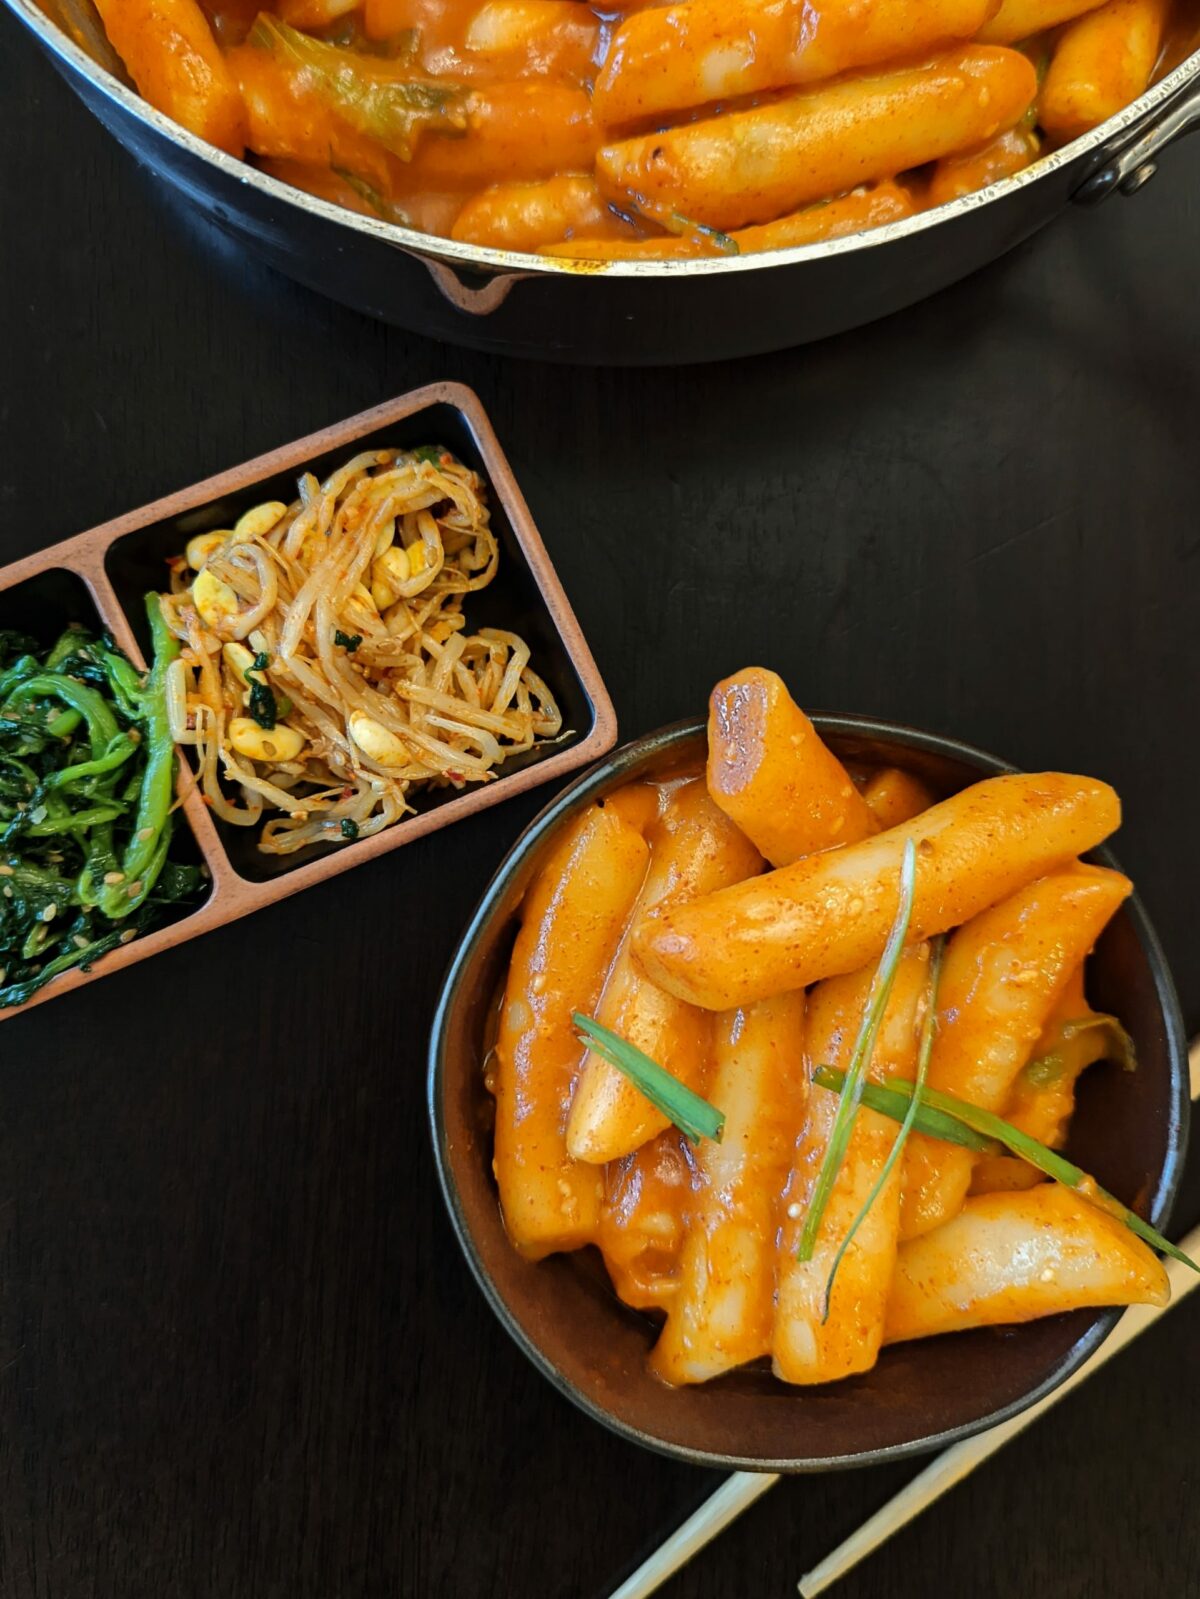 A small bowl of tteokbokki garnished with scallions and served with pickled sides.